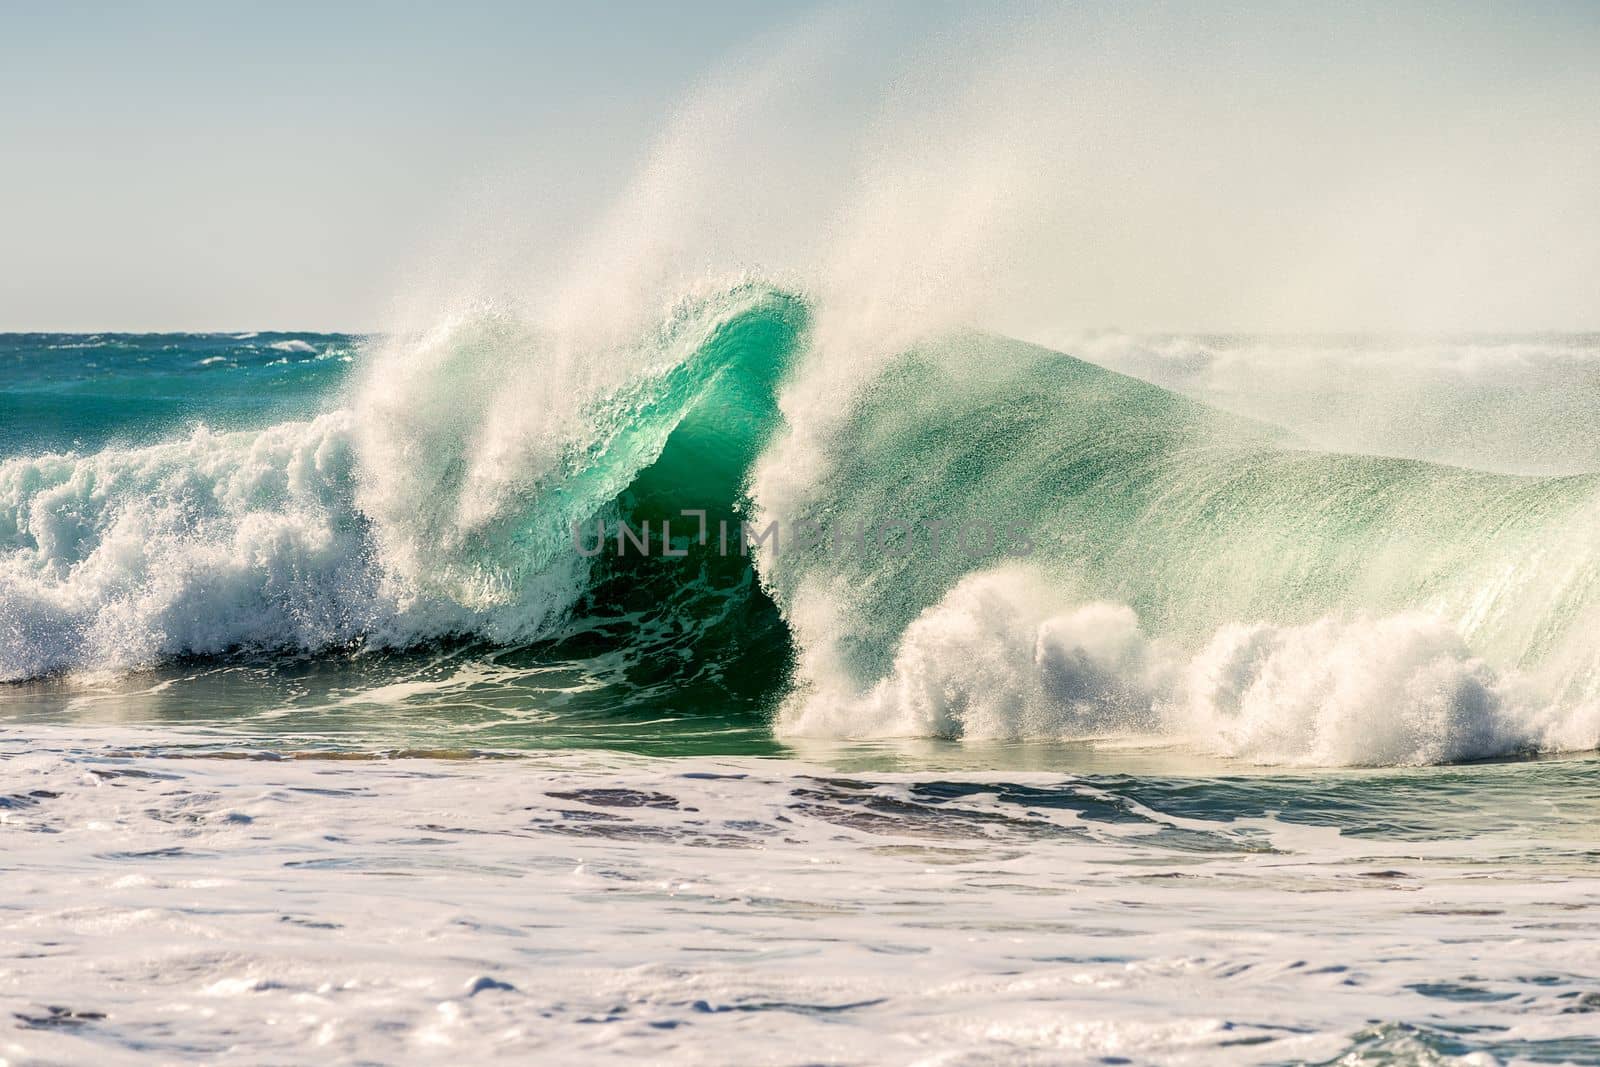 powerful wave breaking on the shore between foam and large plumes of vaporized water, the sun shines on the blue and turquoise surface of the water, the sky is clean and clear